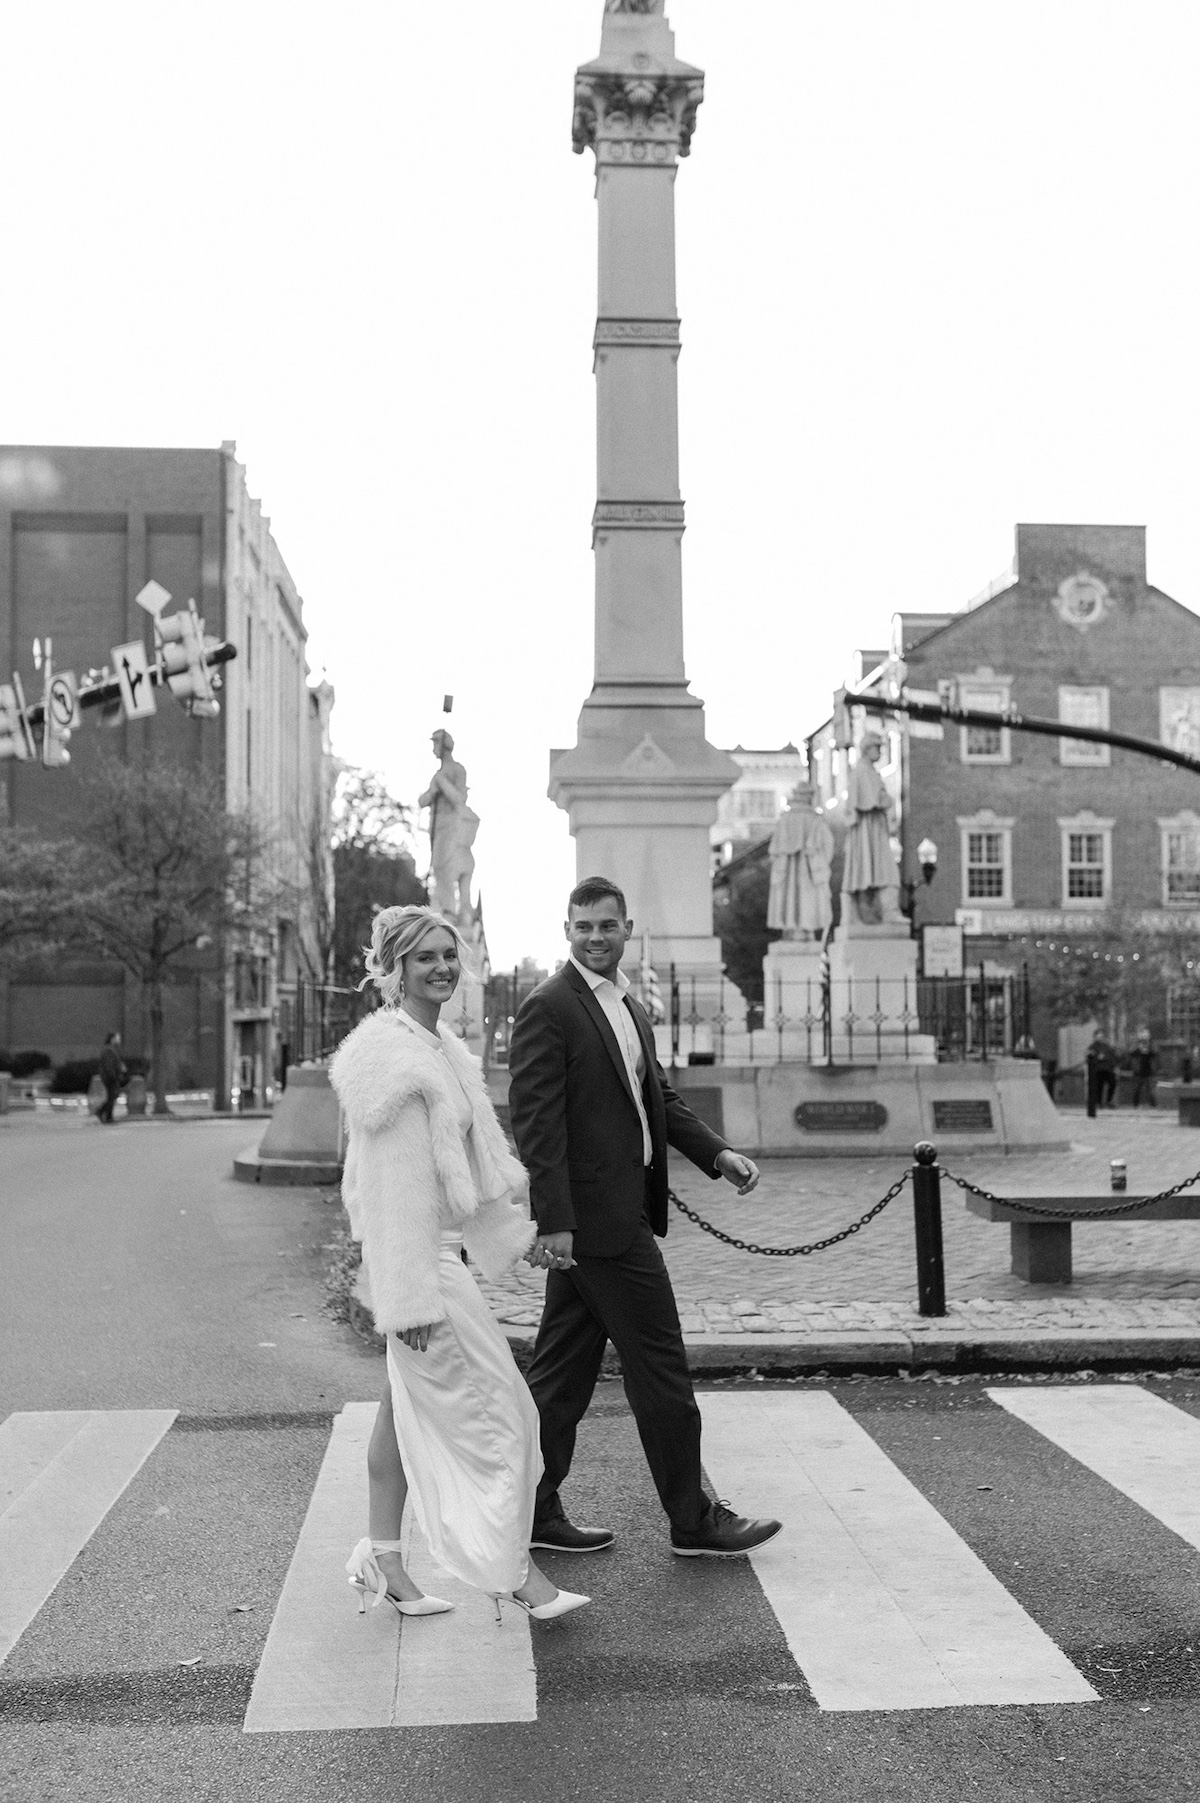 Sophisticated and romantic, this portrait captures connection amidst the historic charm of Lancaster City.